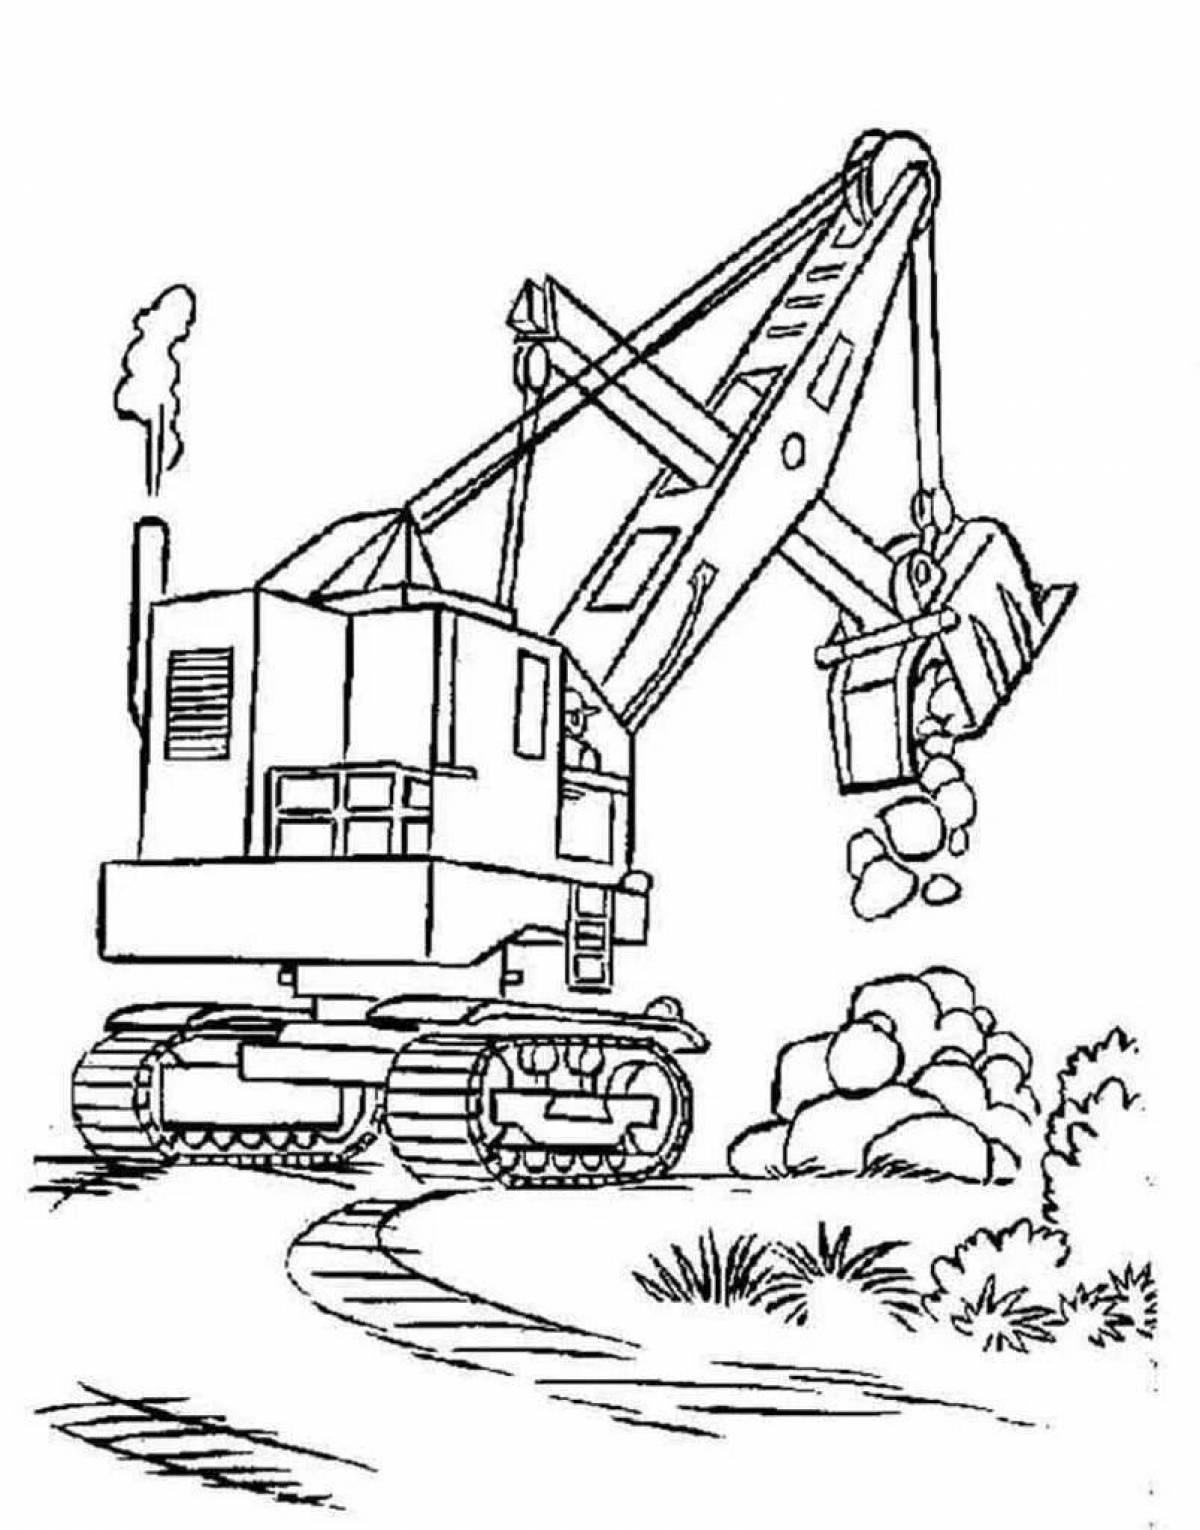 Coloring pages excavator for kids